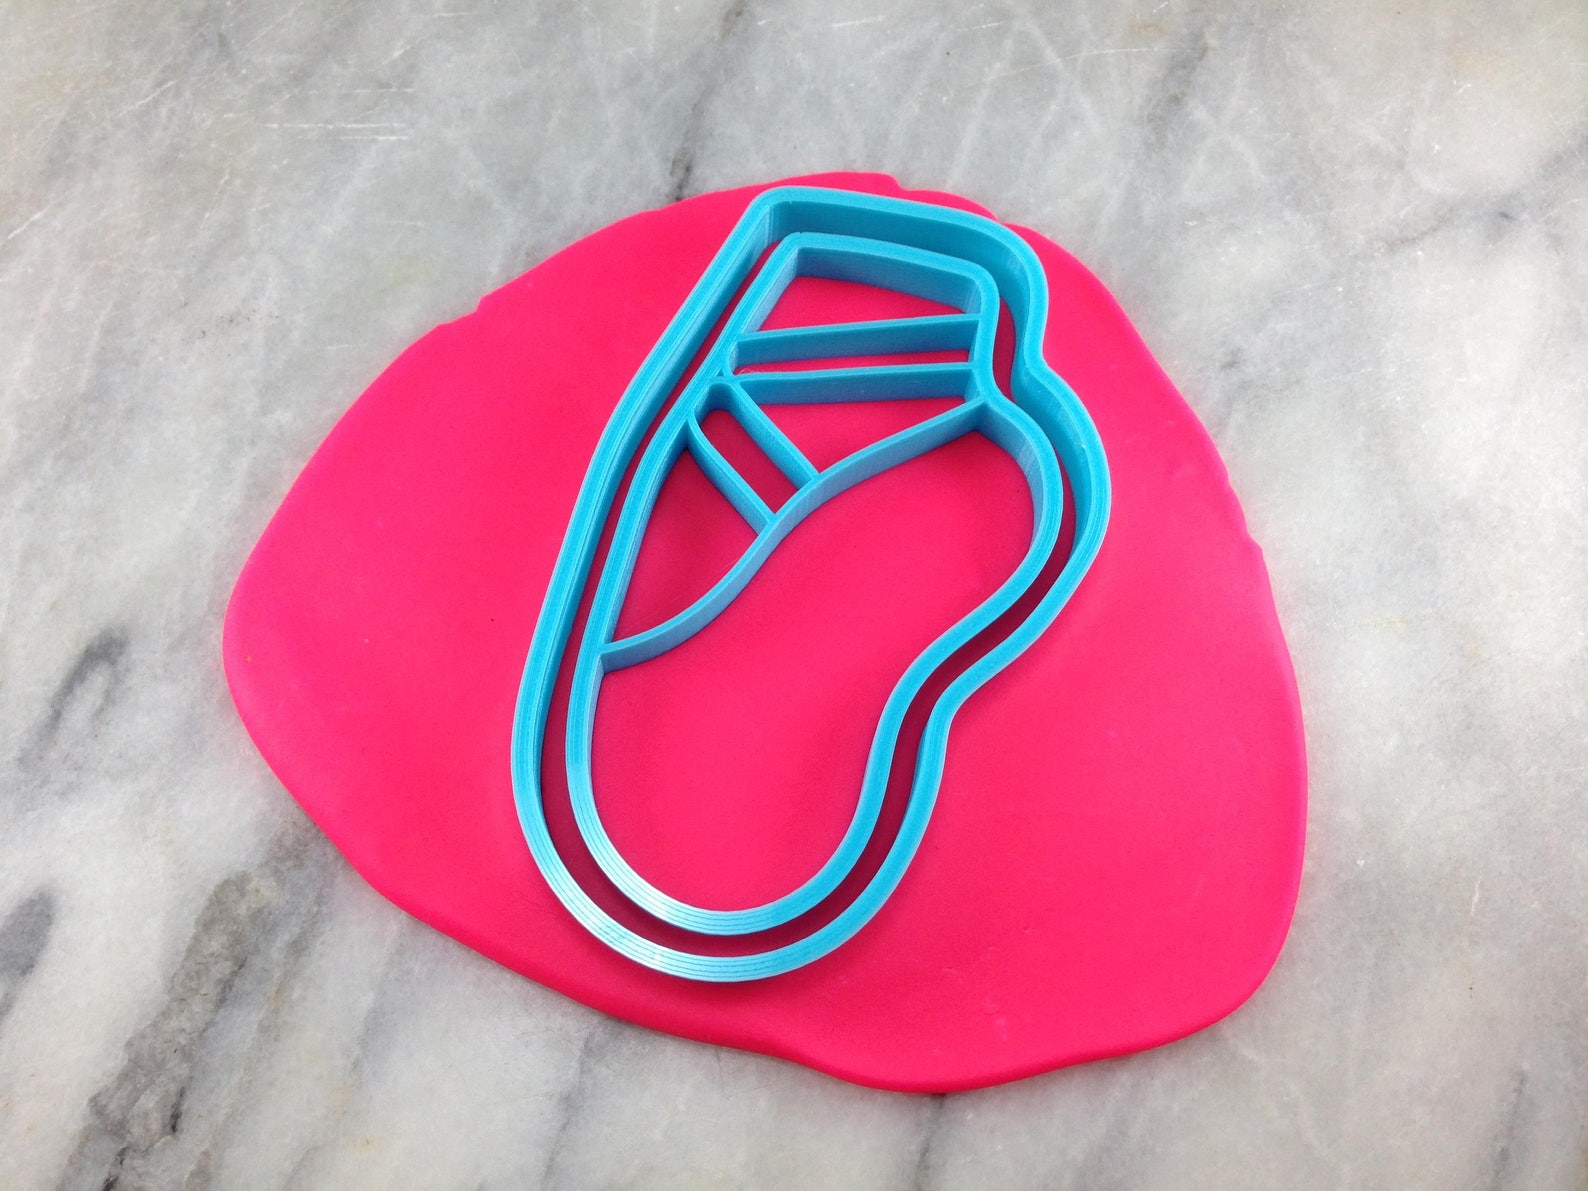 ballet slipper cookie cutter 2-piece, outline & stamp - sharp edges - fast shipping - choose your own size!